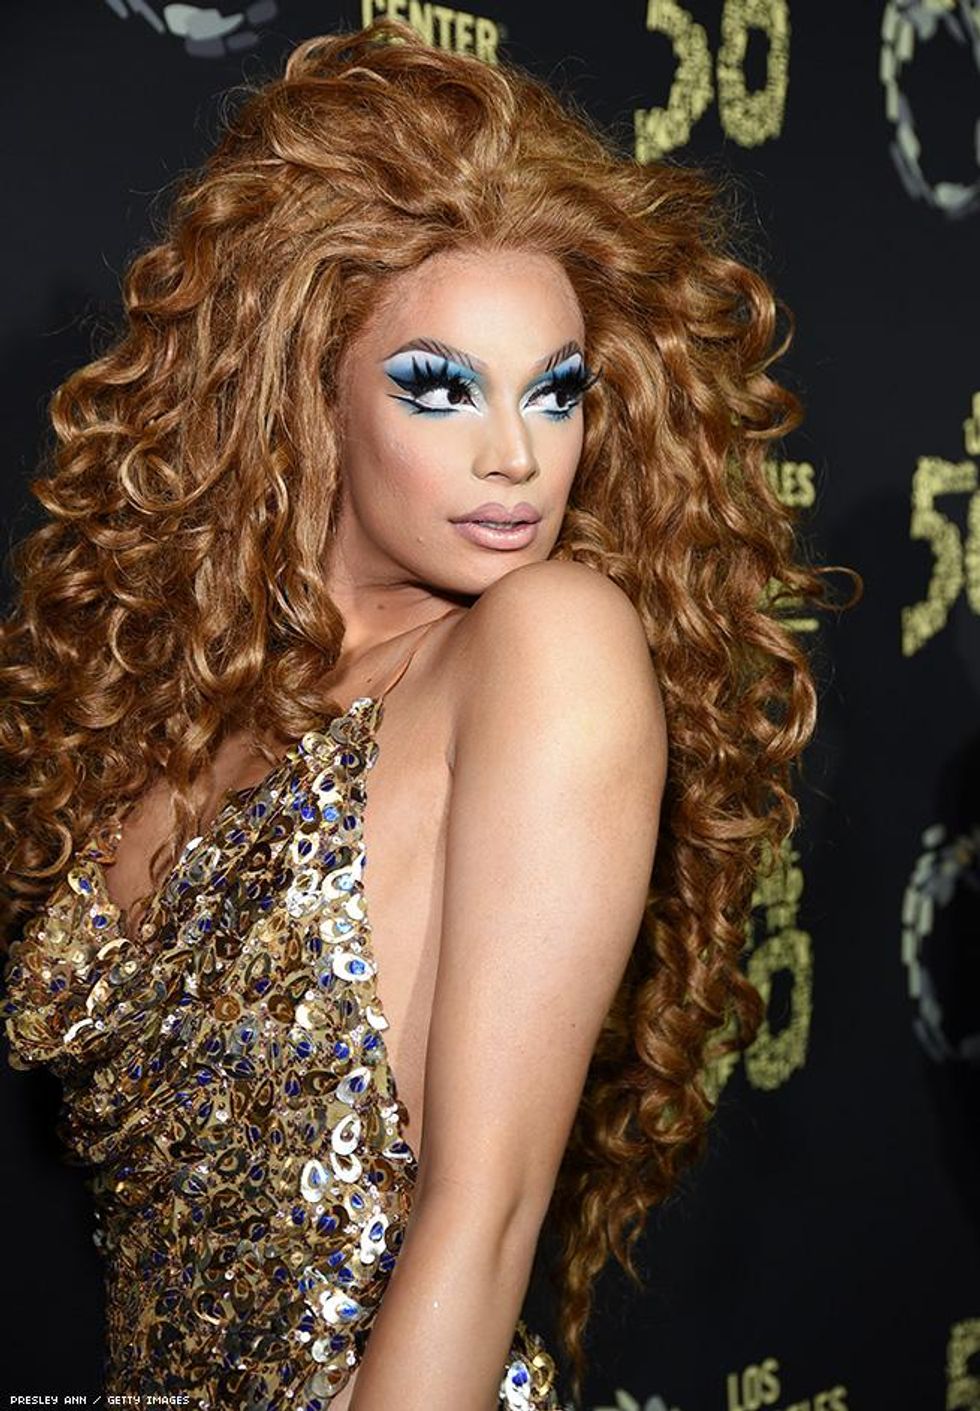 Valentina attends Los Angeles LGBT Center Celebrates 50th Anniversary With Hearts Of Gold Concert & Multimedia Extravaganza at The Greek Theatre